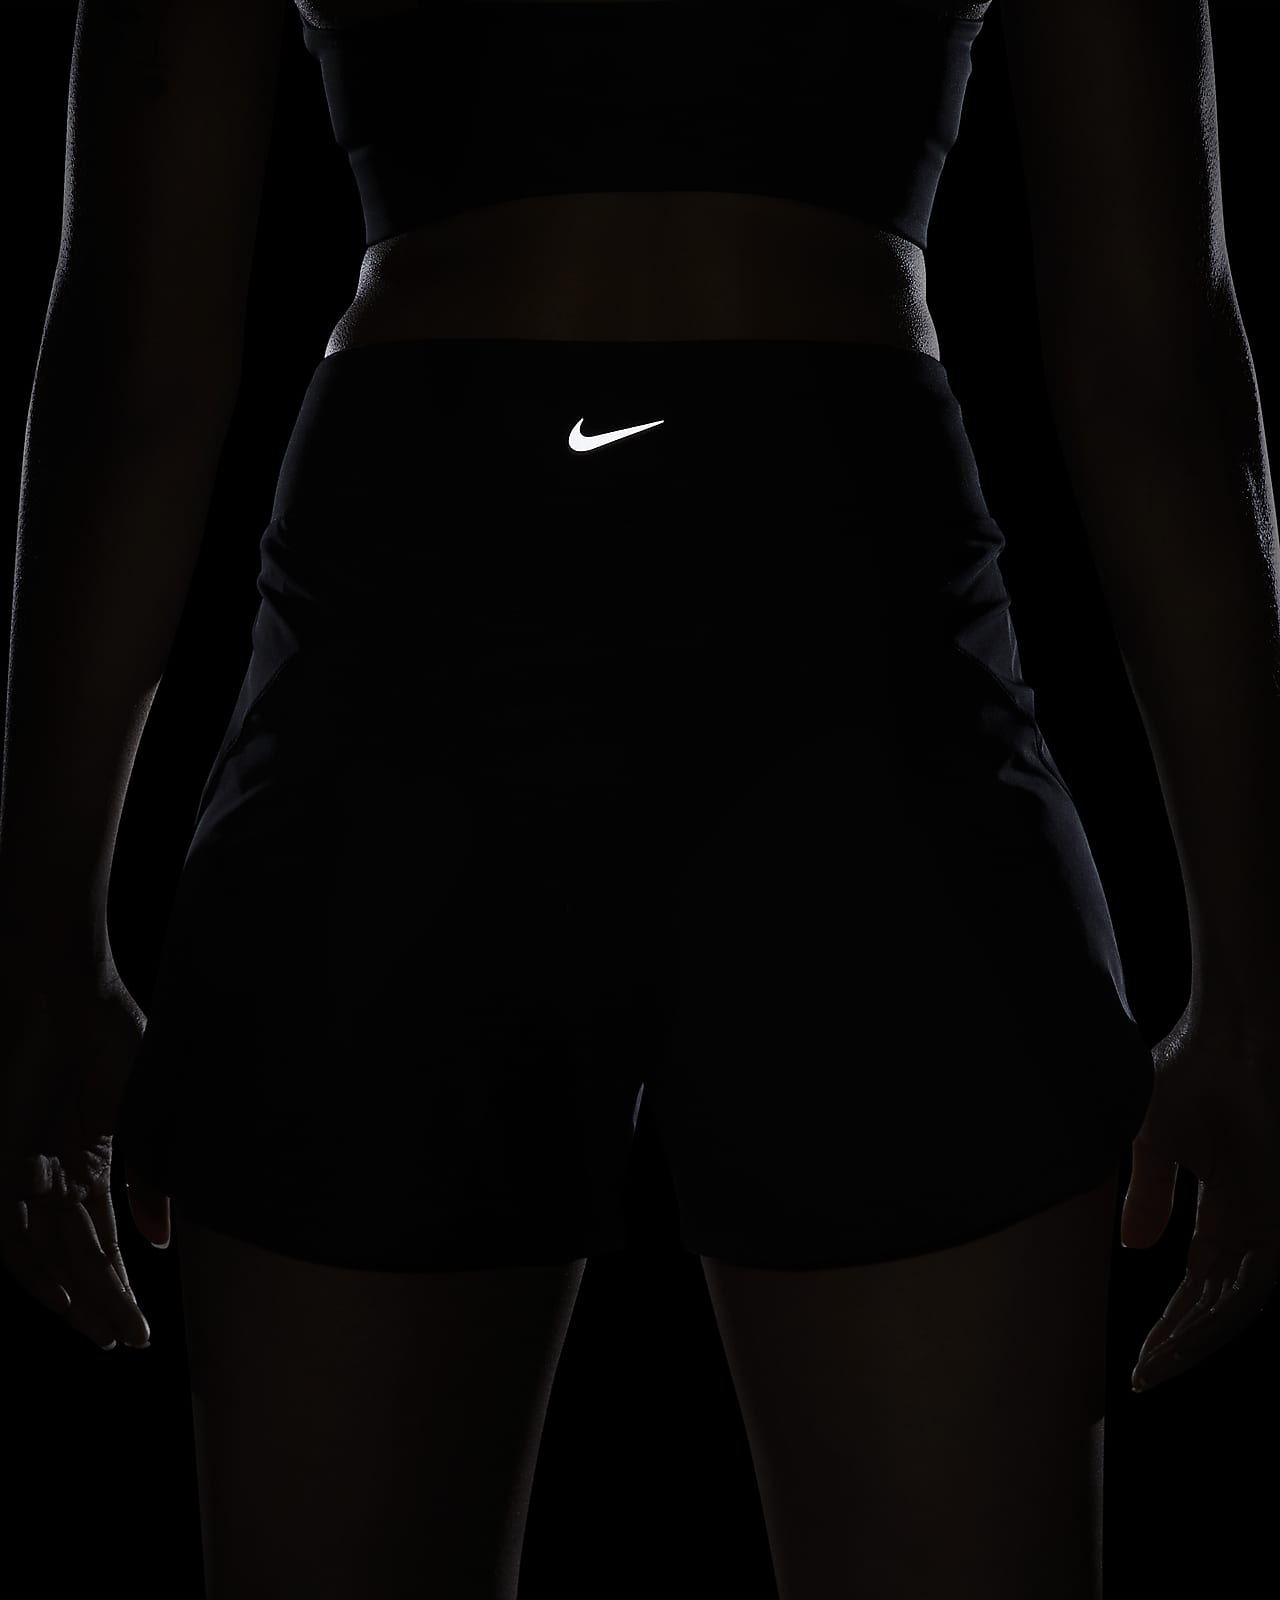 NEW! NIKE [S] Women PACER DRI-FIT Runner/Yoga Shorts-Anthracite/Pink  543957-060